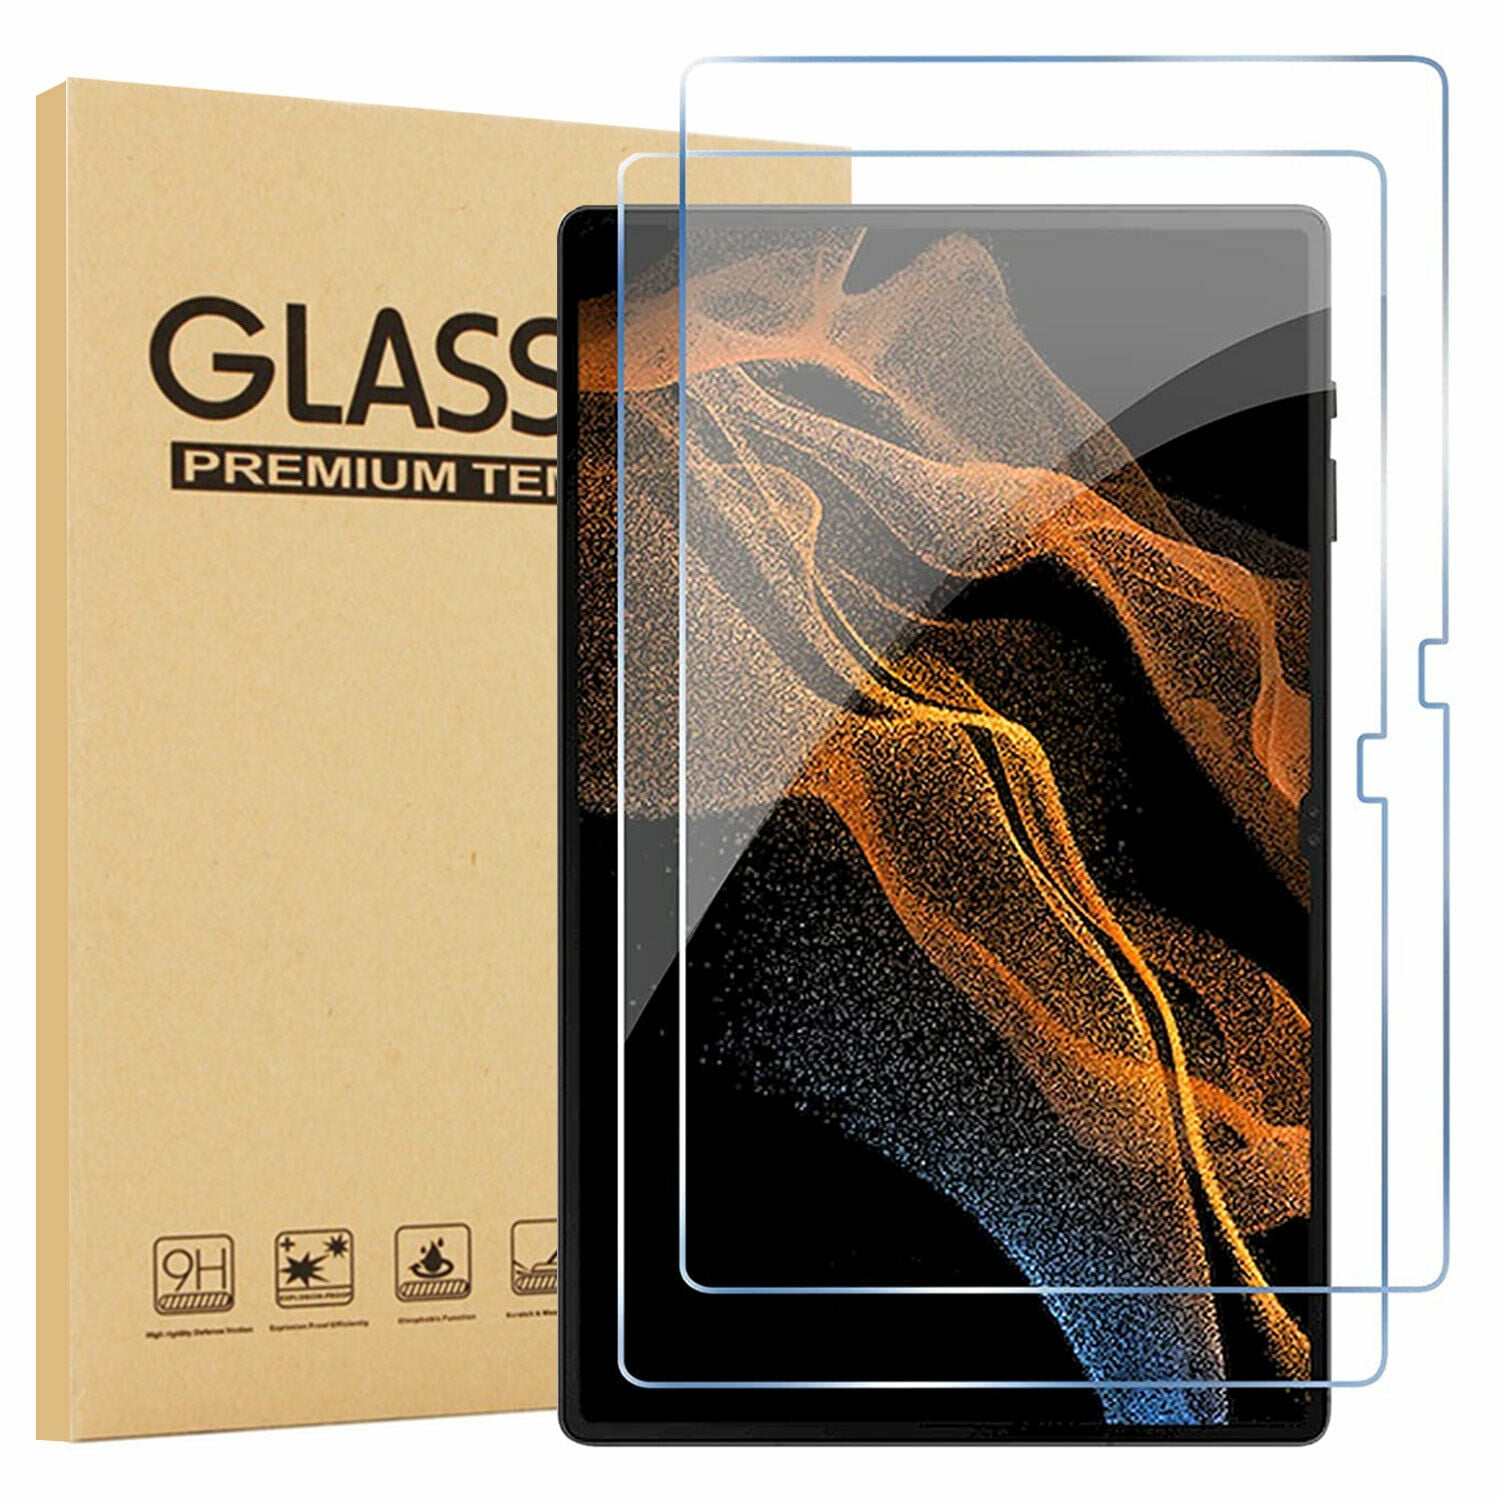 Ultra Clear XtremeGuard LCD Screen Protector Shield For Kocaso M9200 9" Tablet 